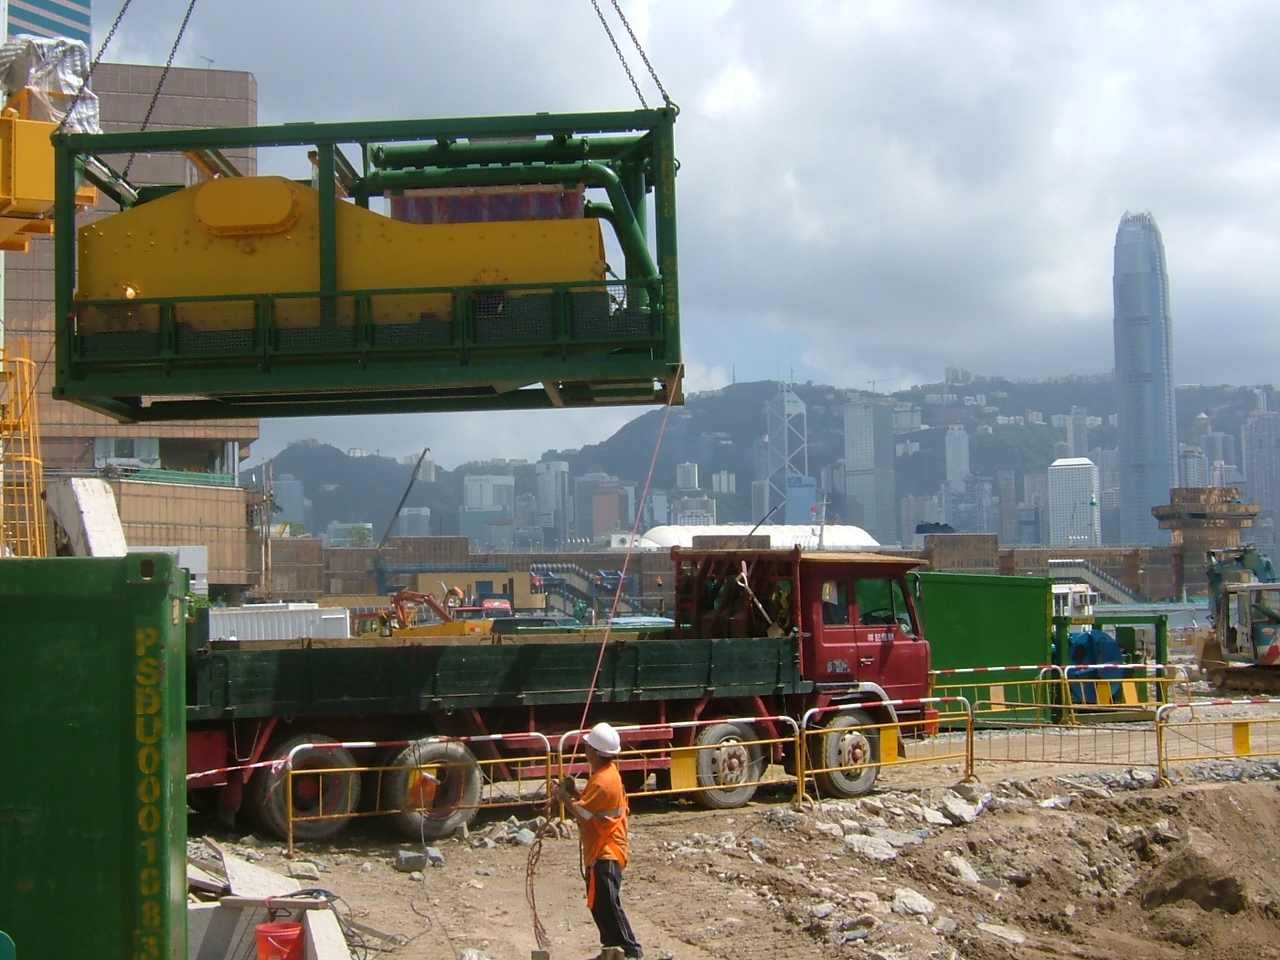 Equipment arriving on site in Kowloon